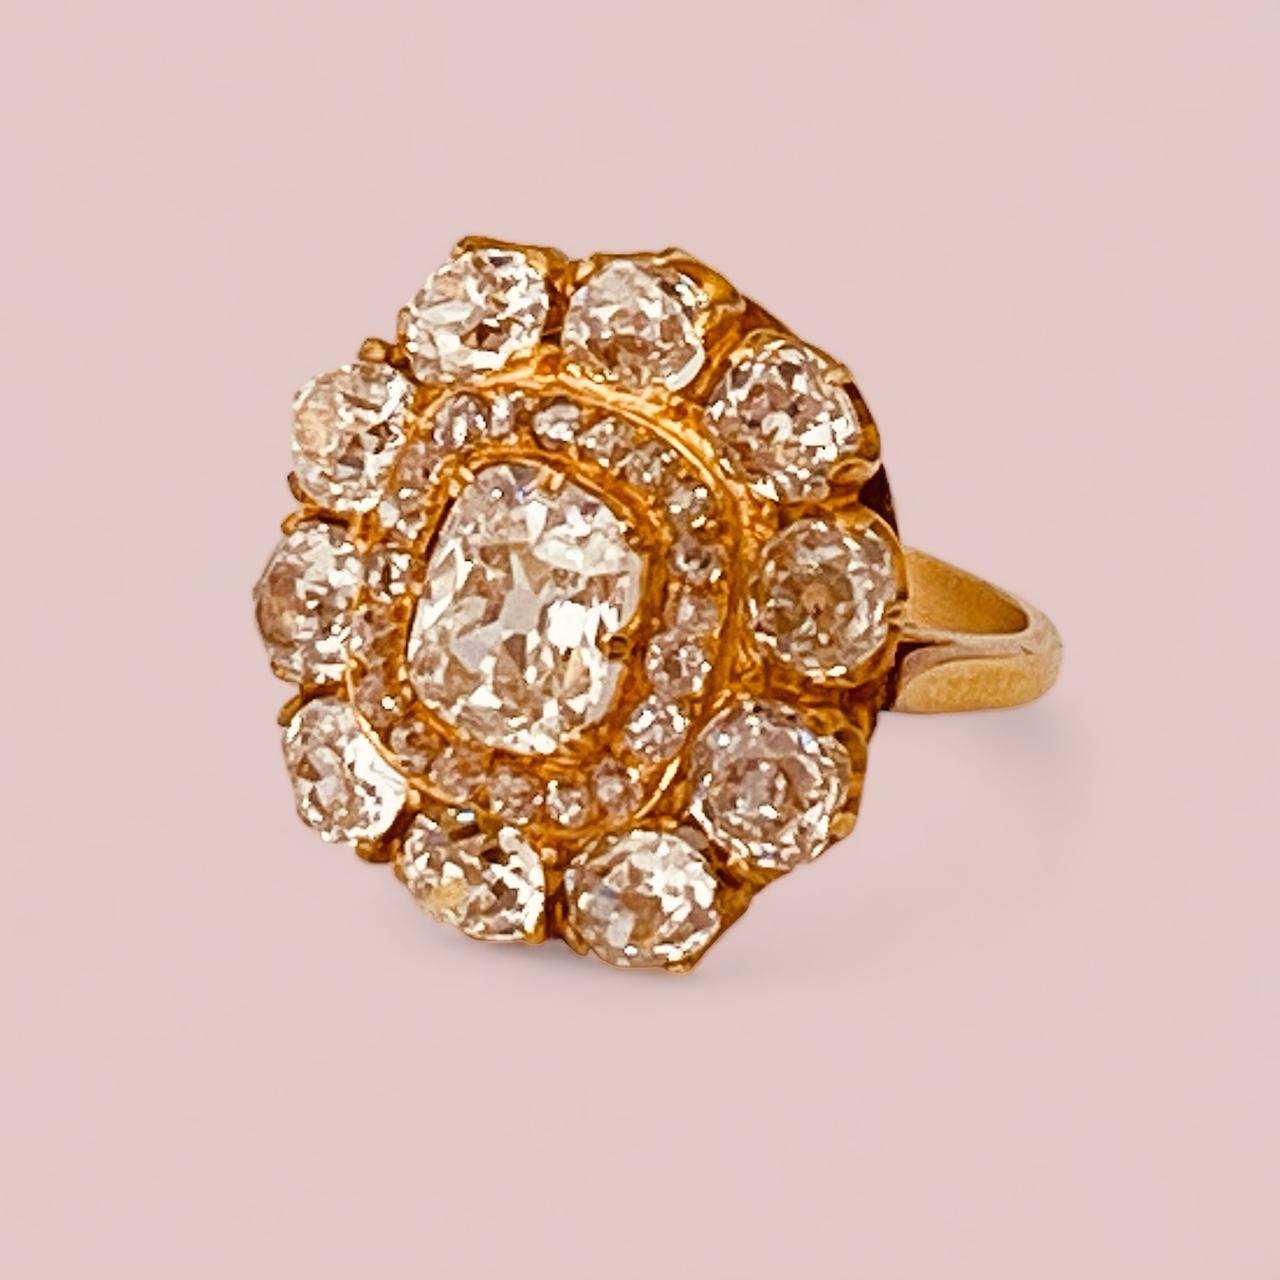 Antique Cushion Cut Antique Diamonds Cluster Ring With Central Old-Cut Cushion Weighing 1.35cts For Sale